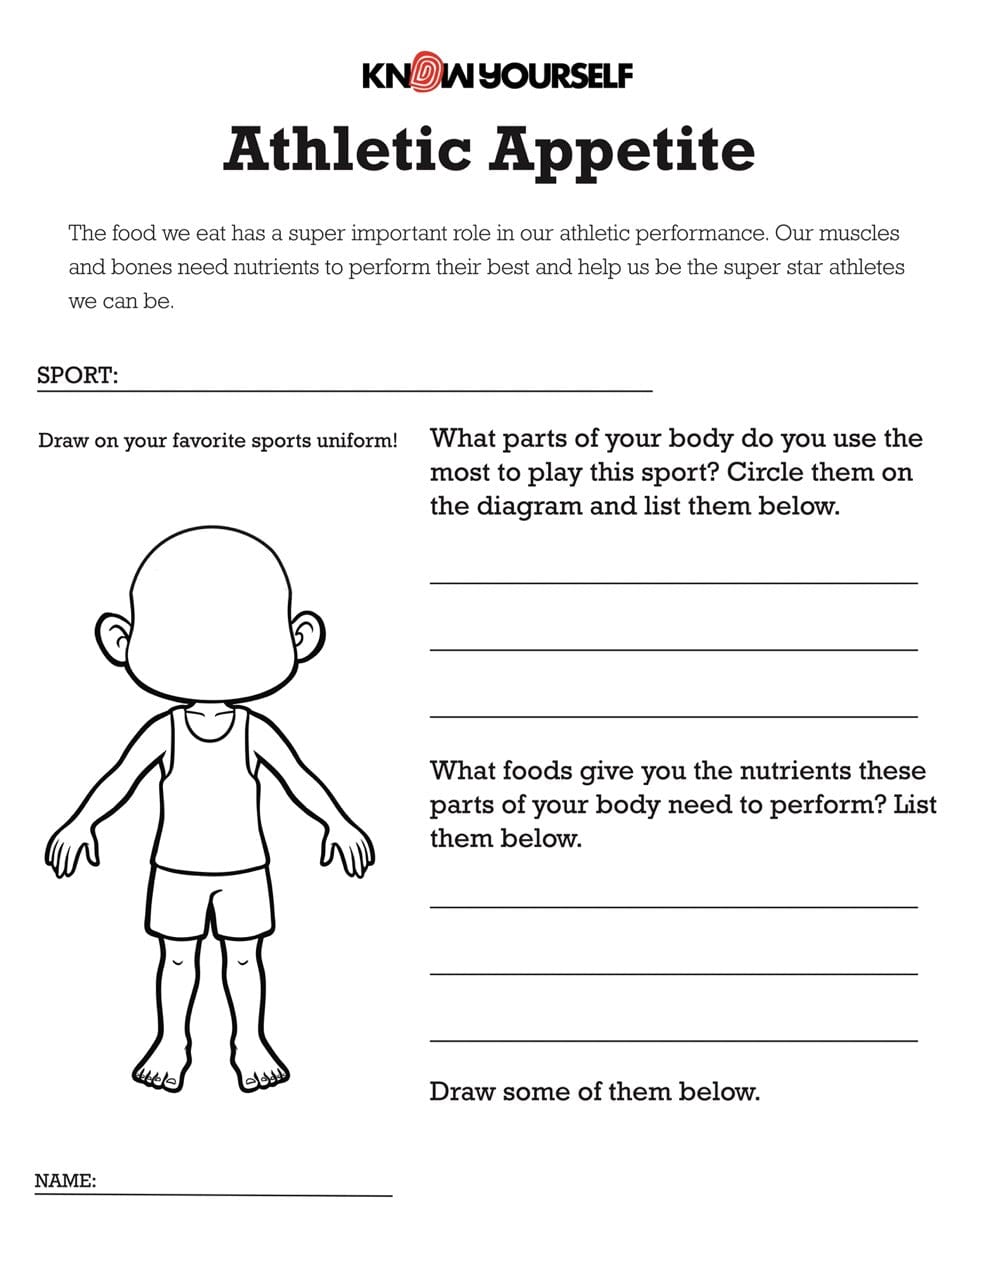 Athletic Appetite Activity